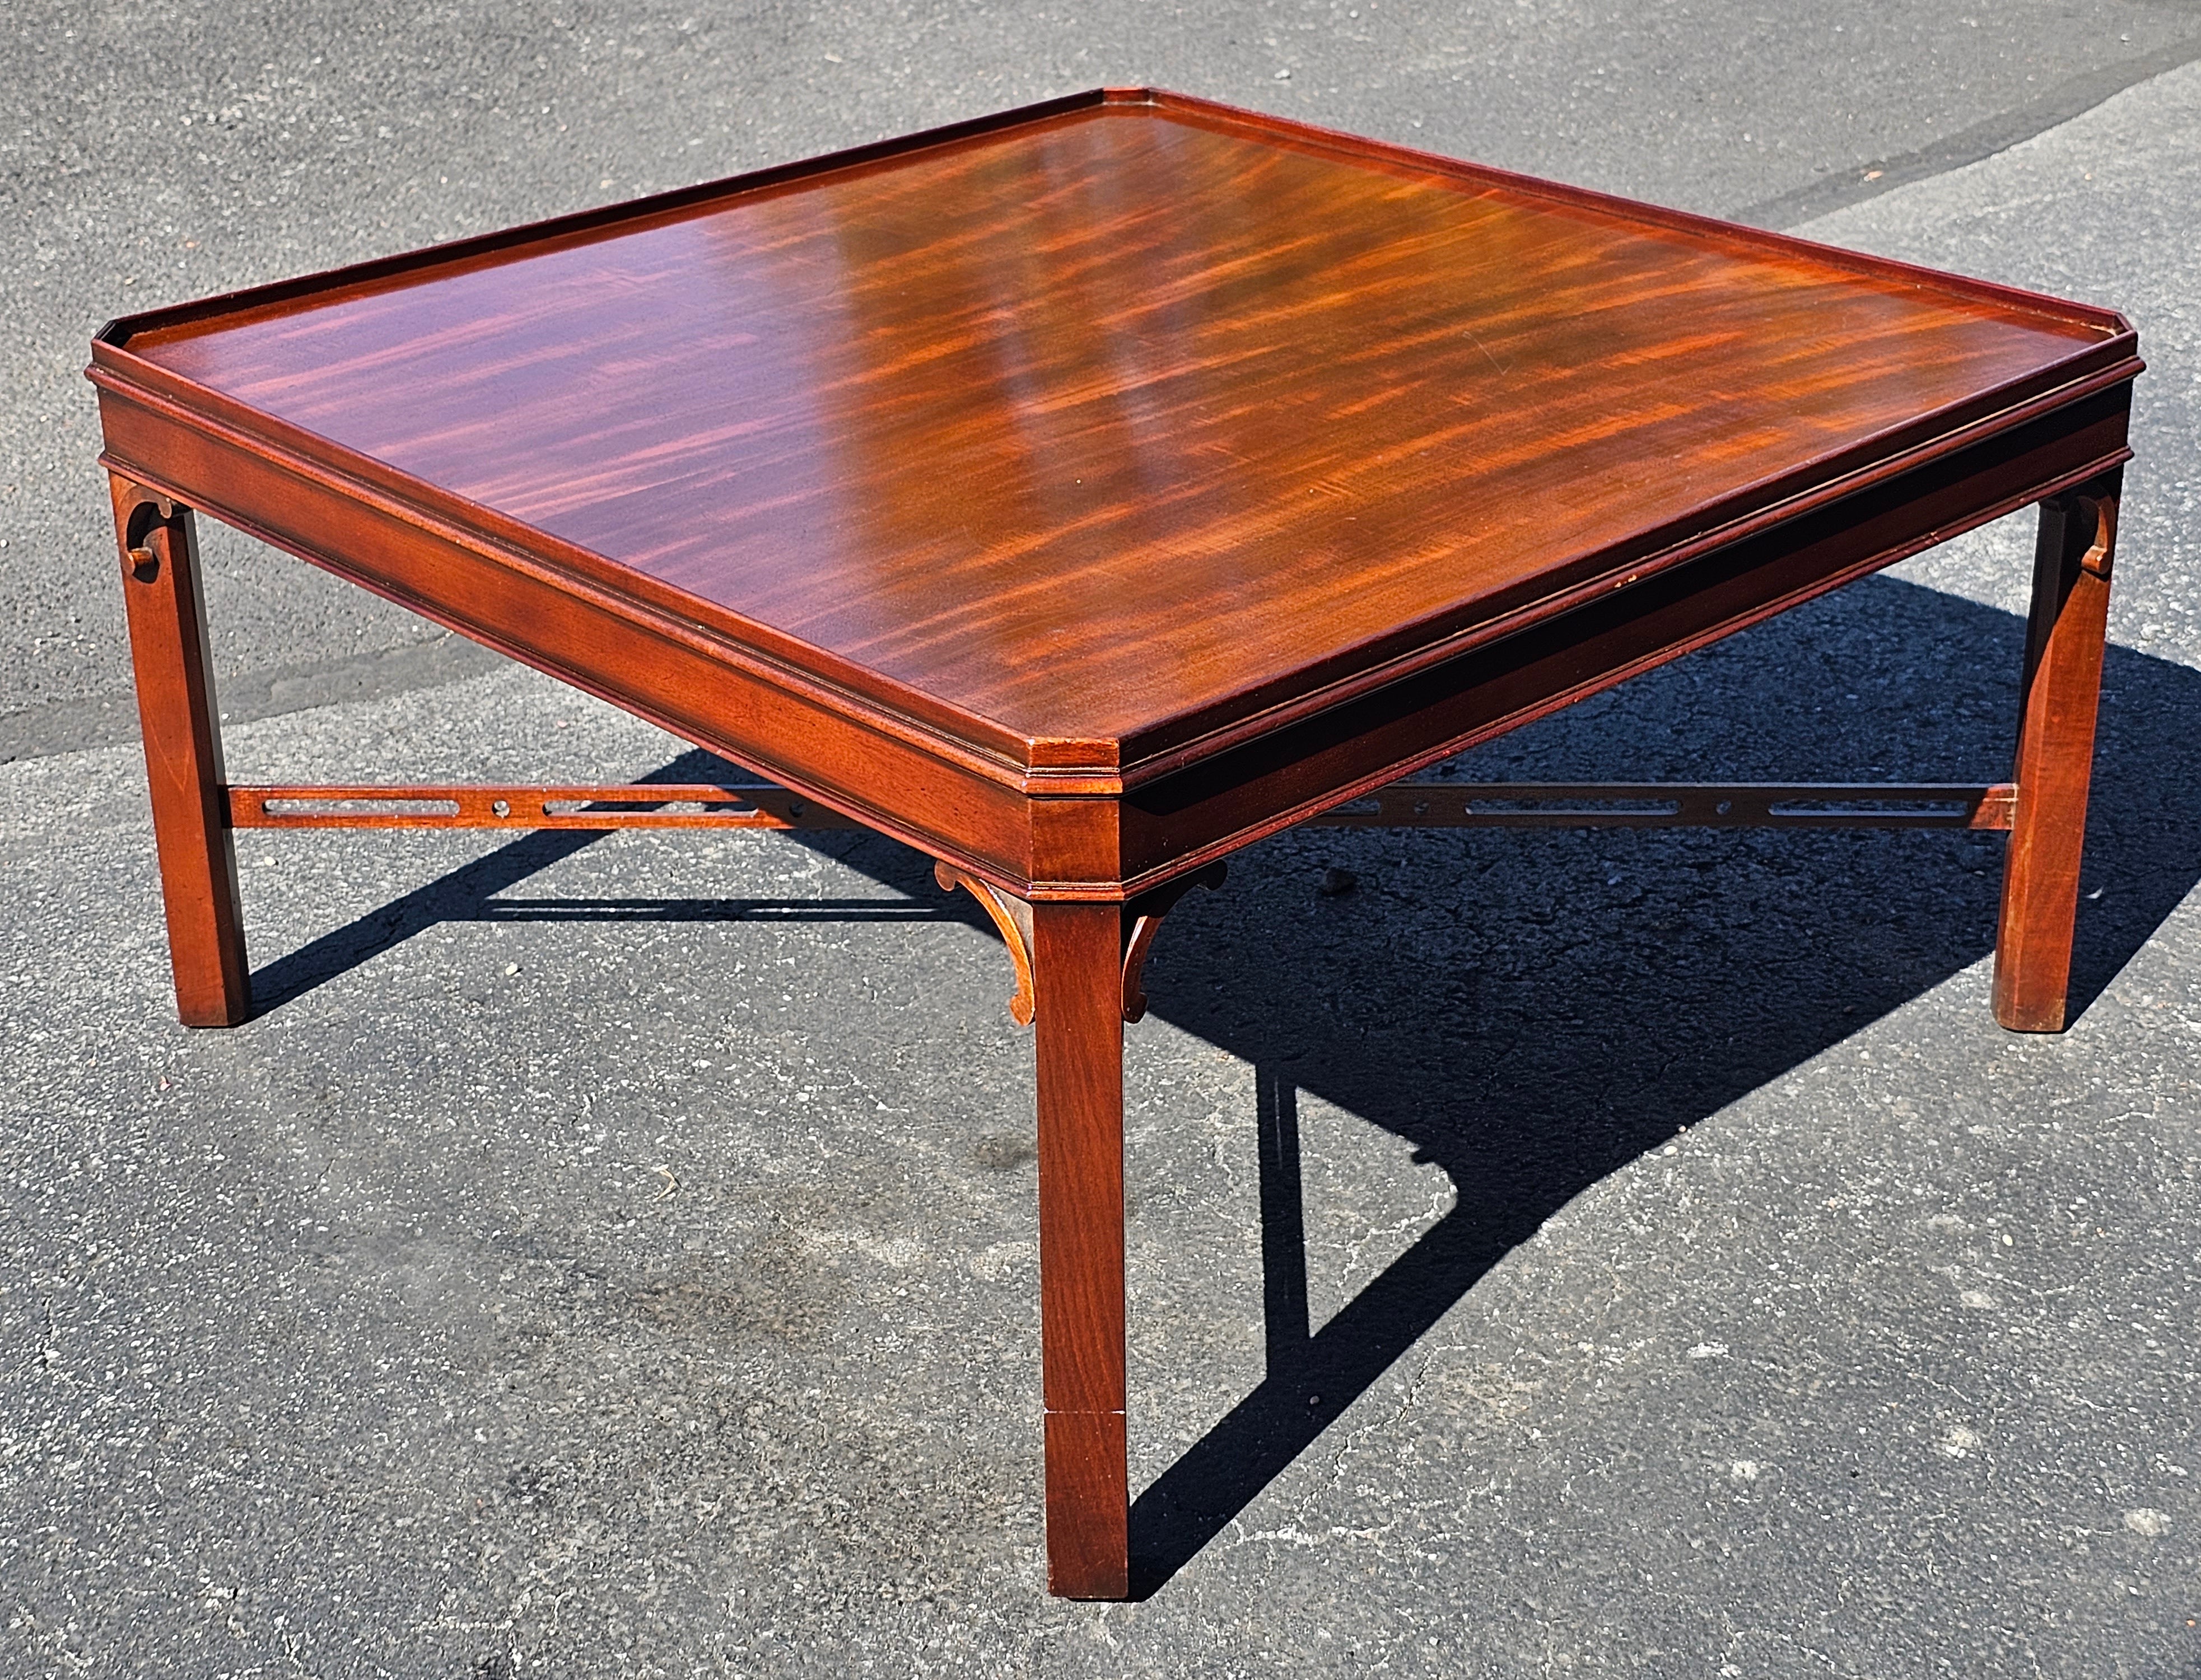 A 20th Century George III Style Solid Mahogany Square Coffee Table with pierced Stretcher. Measures 37